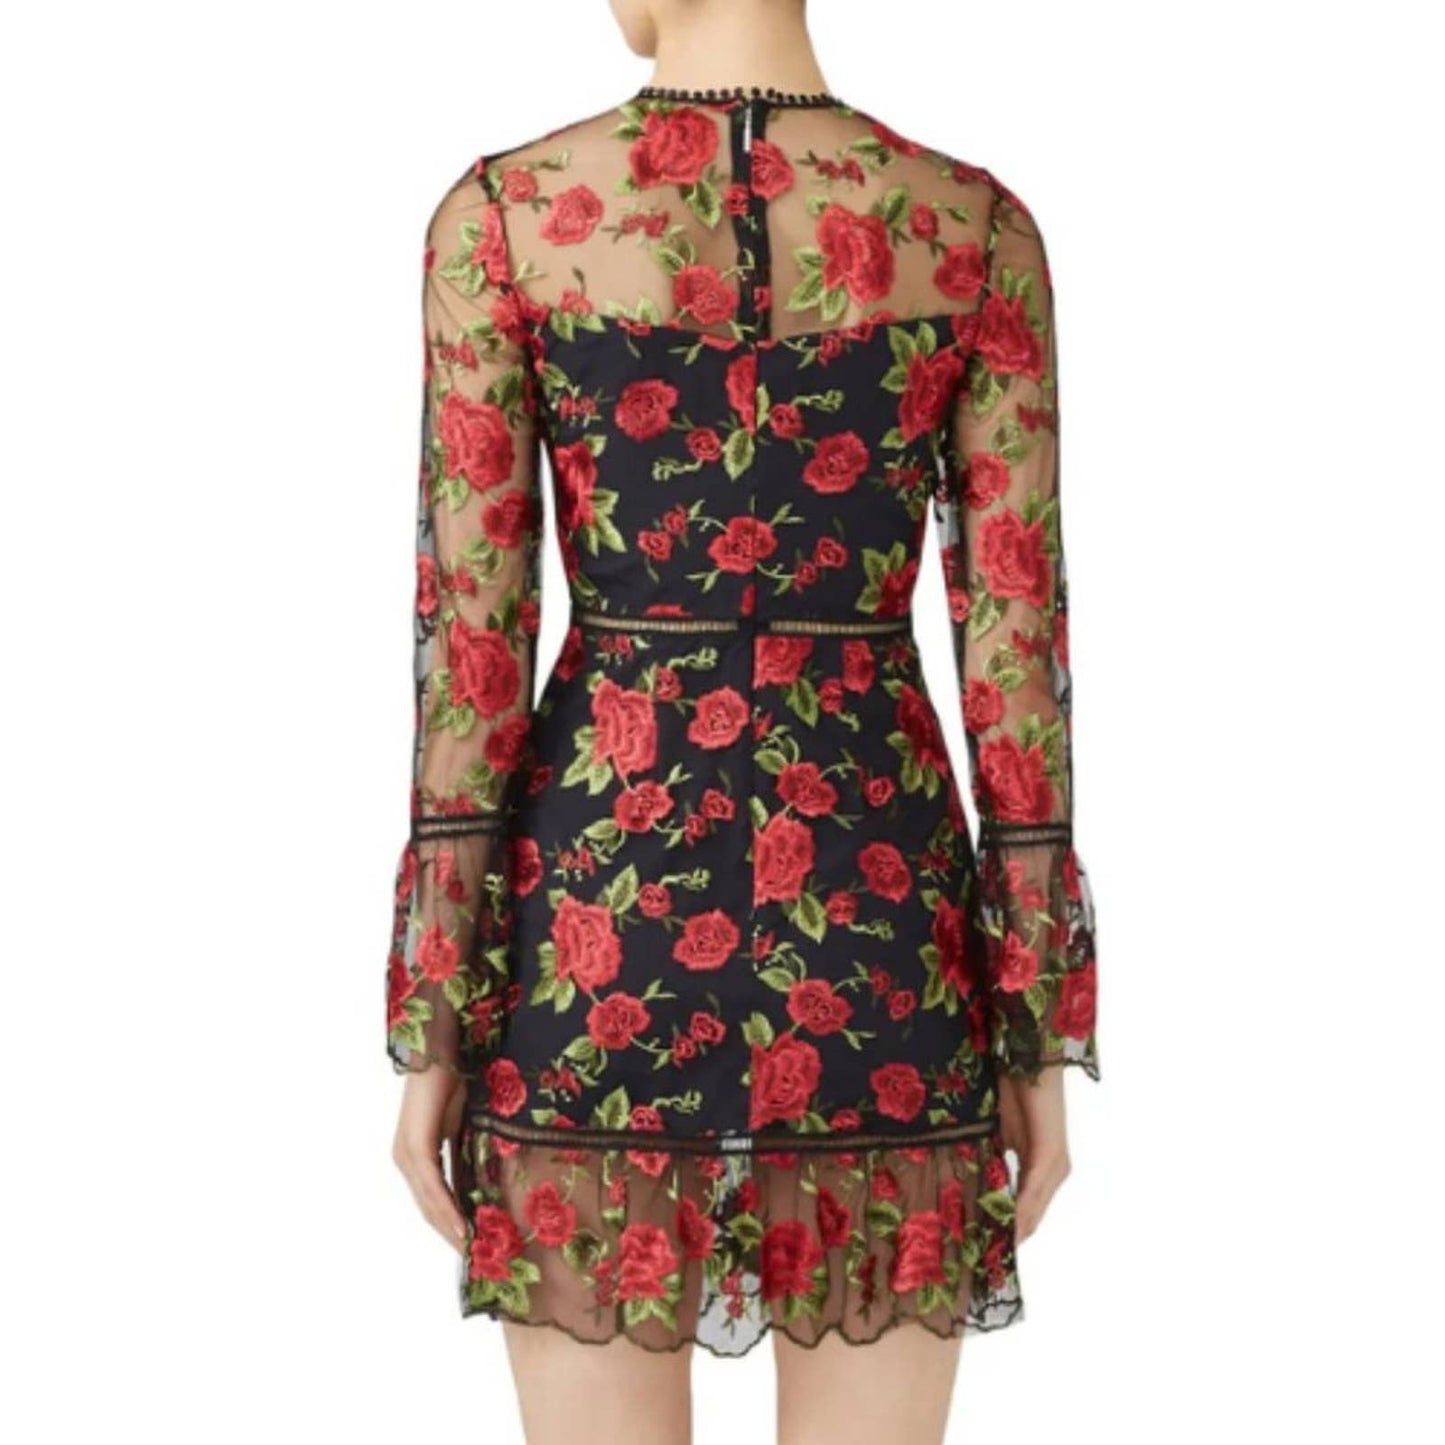 SAYLOR Rose Allison Dress in Black and Red Size Small